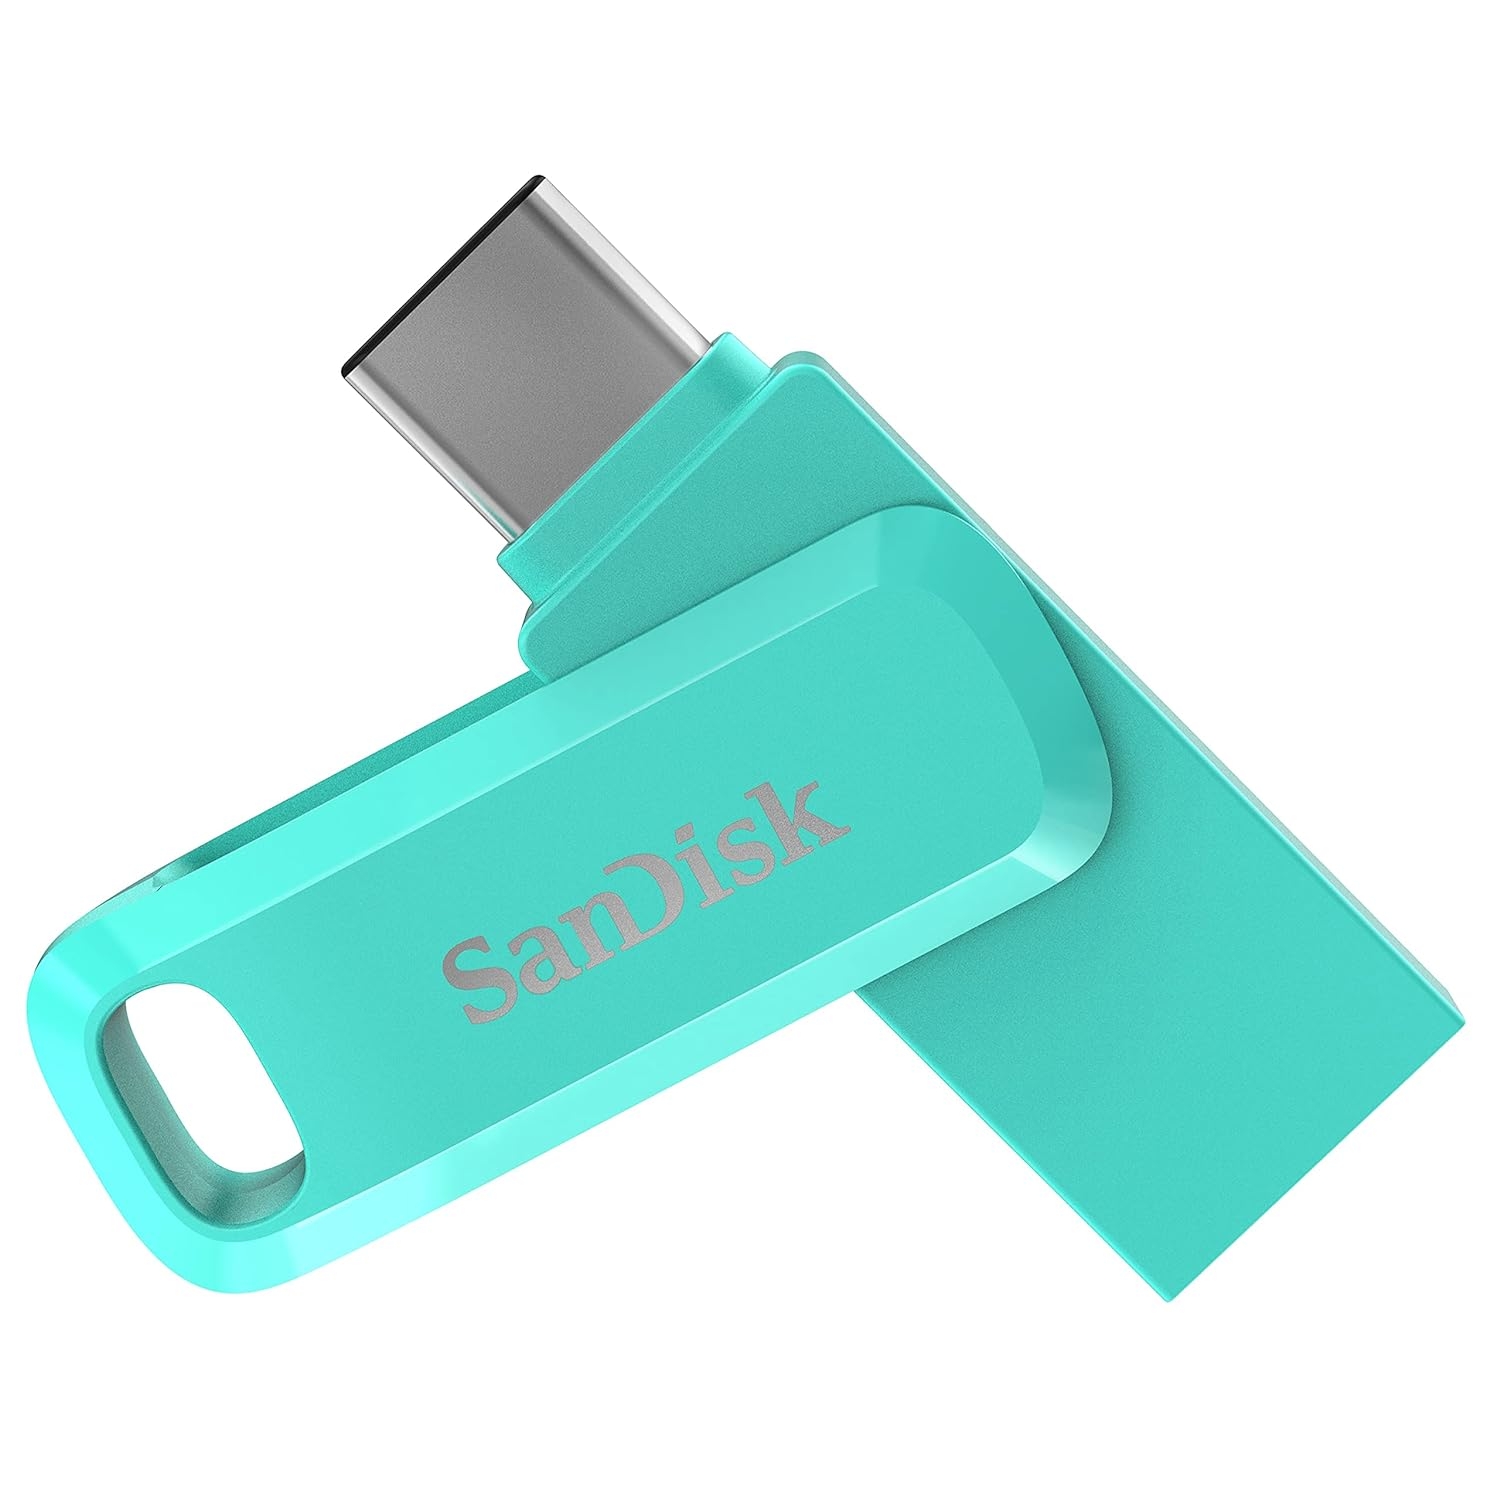 SanDisk Ultra Dual Drive Go 32GB USB 3.0 Type C PenDrive for Mobile (Mint Green, 5Y)